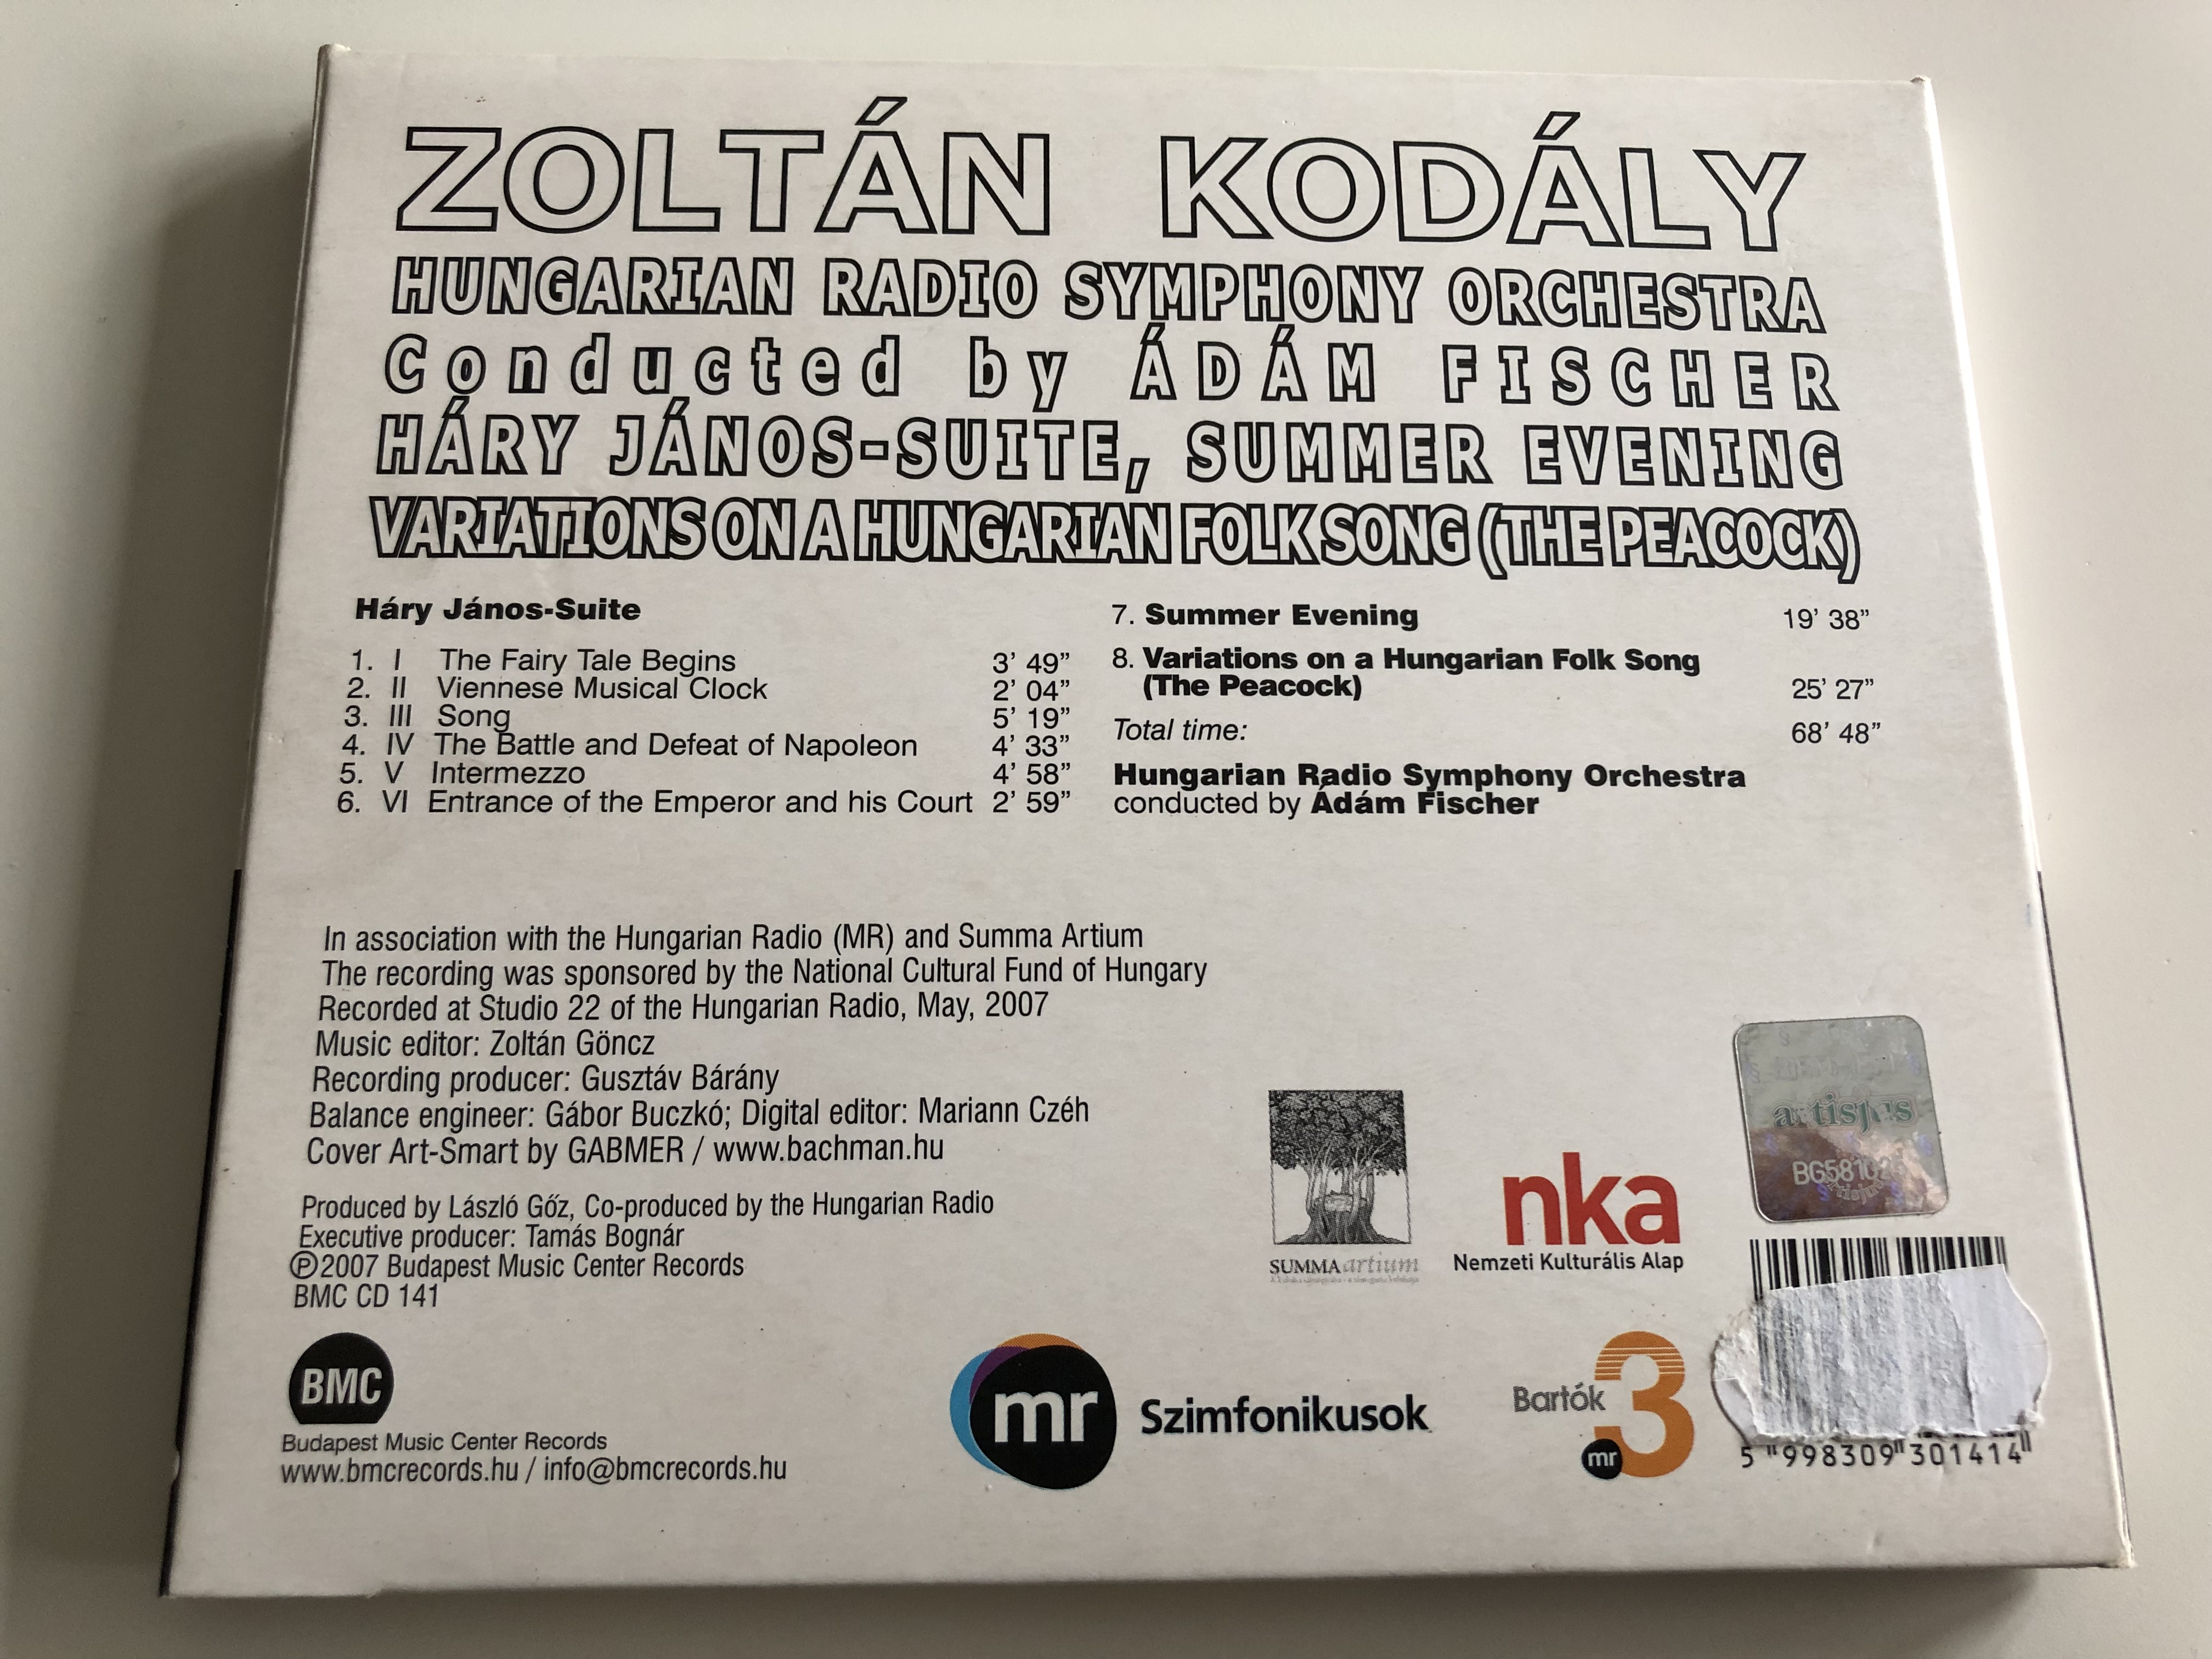 zolt-n-kod-ly-hungarian-radio-symphony-orchestra-conducted-by-d-m-fischer-h-ry-j-nos-suite-summer-evening-variations-on-a-hungarian-folksong-the-peacock-budapest-music-center-records-a-9-.jpg